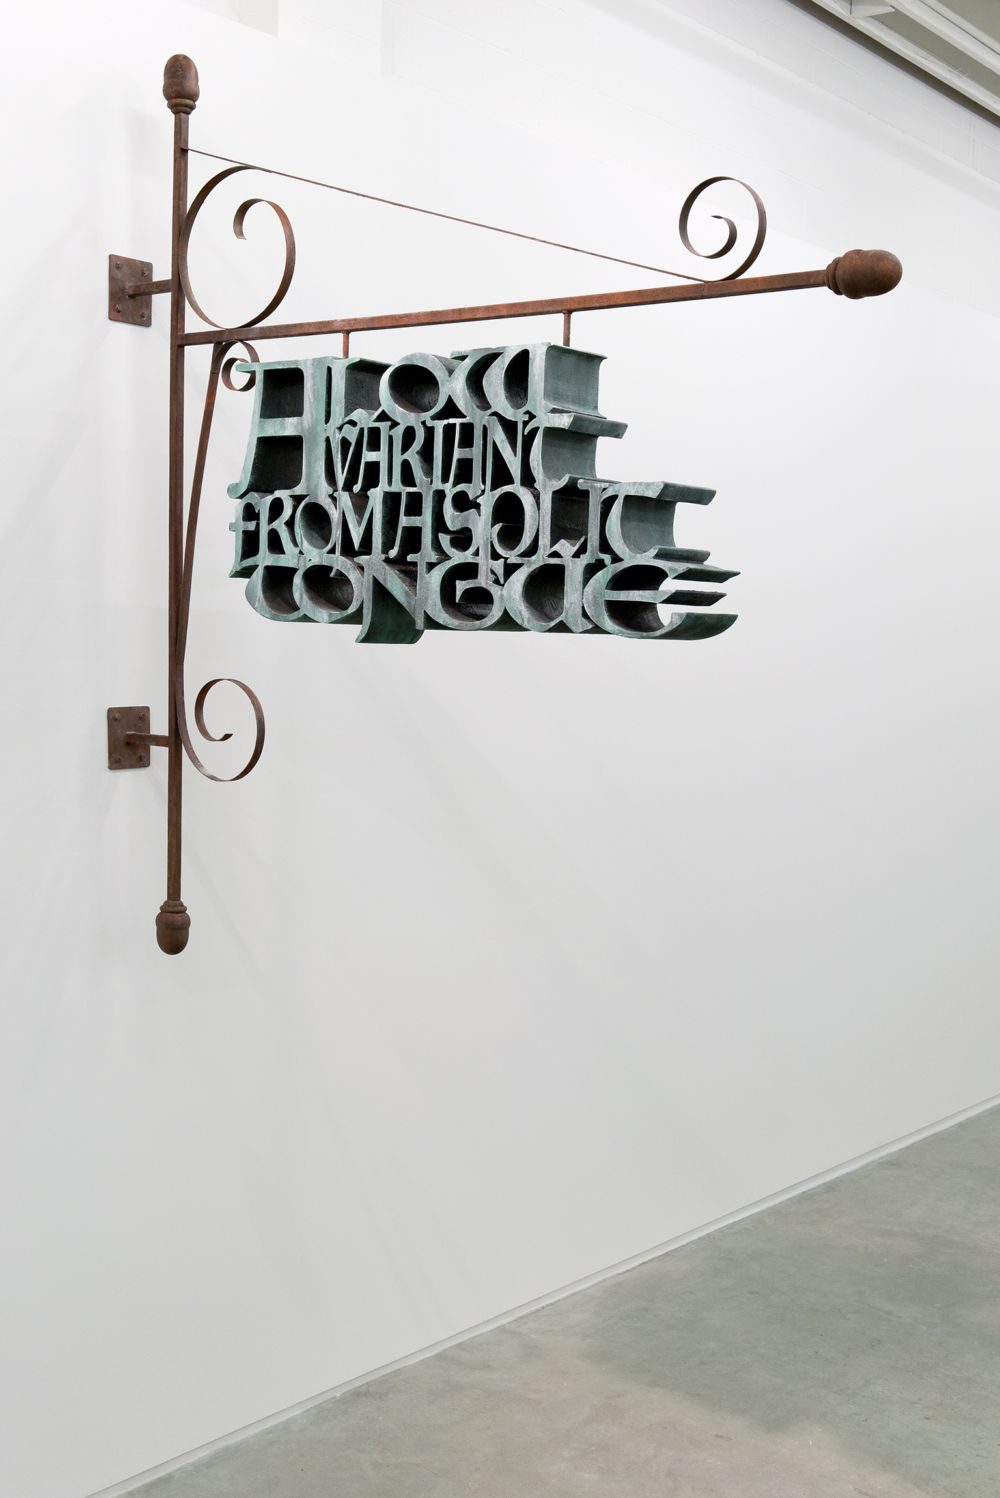 Alex Morrison, A Low Variant from a Split Tongue, 2010, steel, MDF, drywall compound, acrylic paint, 82 x 77 x 7 in. (208 x 196 x 18 cm) by 